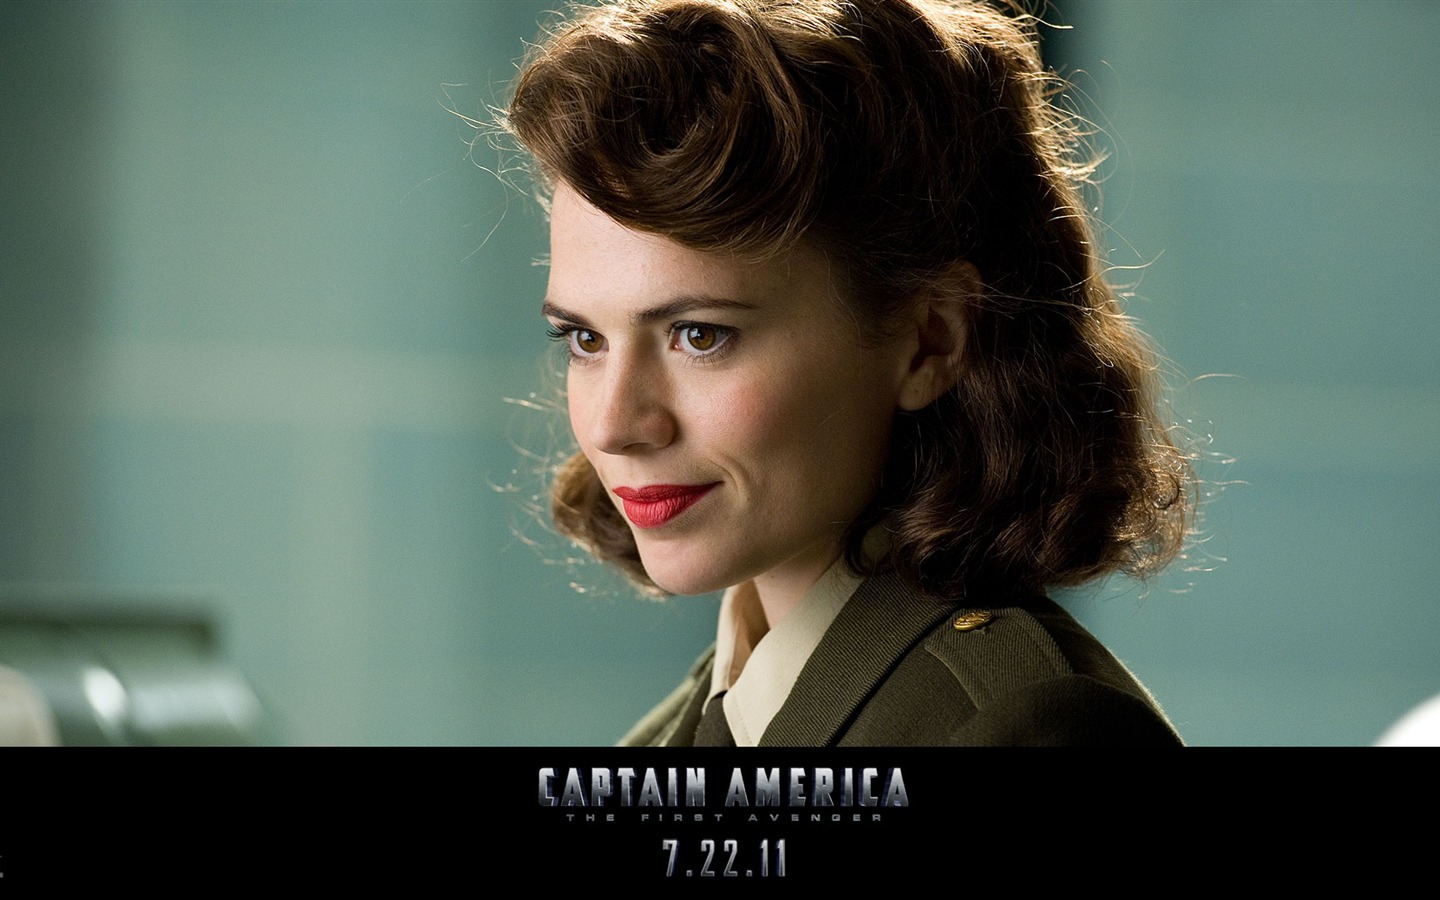 Captain America: The First Avenger wallpapers HD #11 - 1440x900